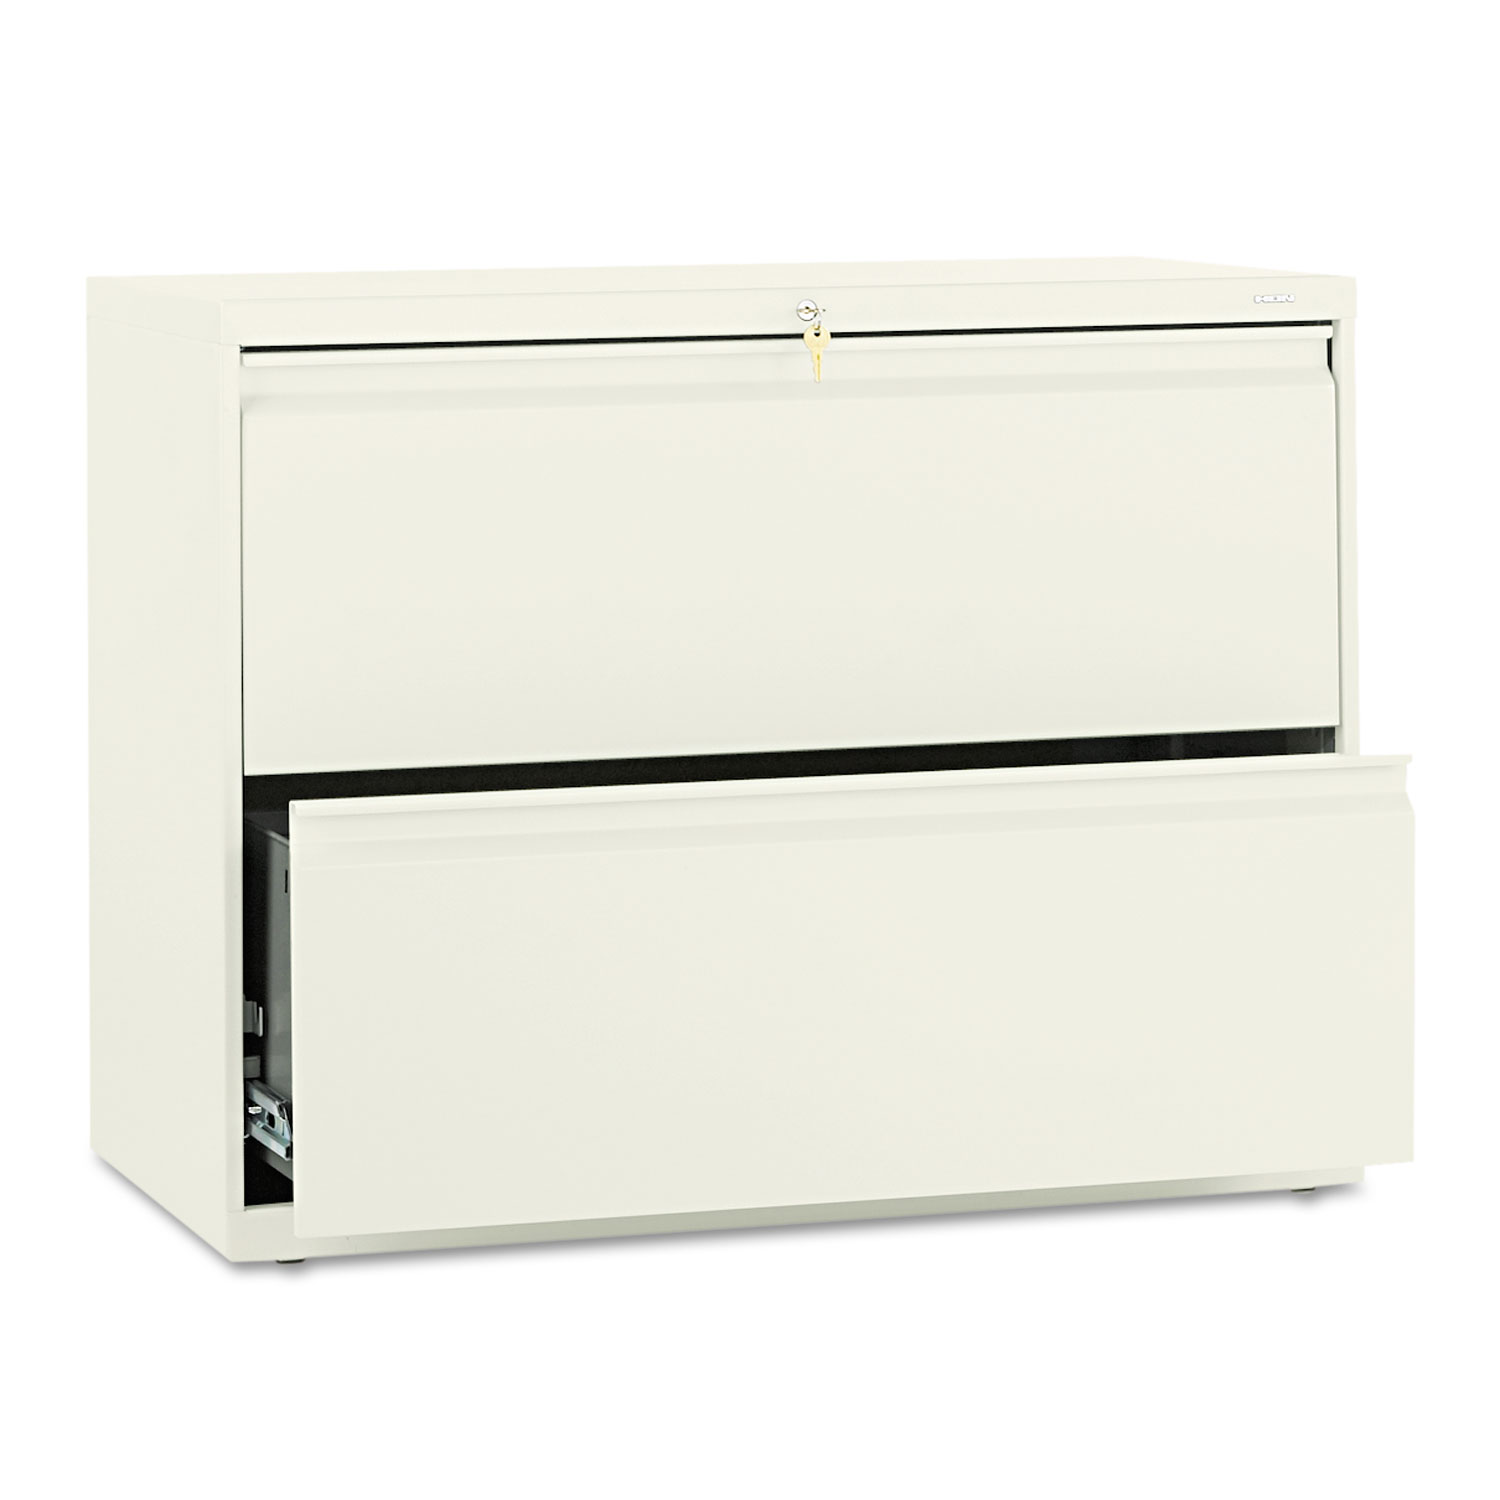 800 Series Two-Drawer Lateral File, 36w x 19-1/4d x 28-3/8h, Putty